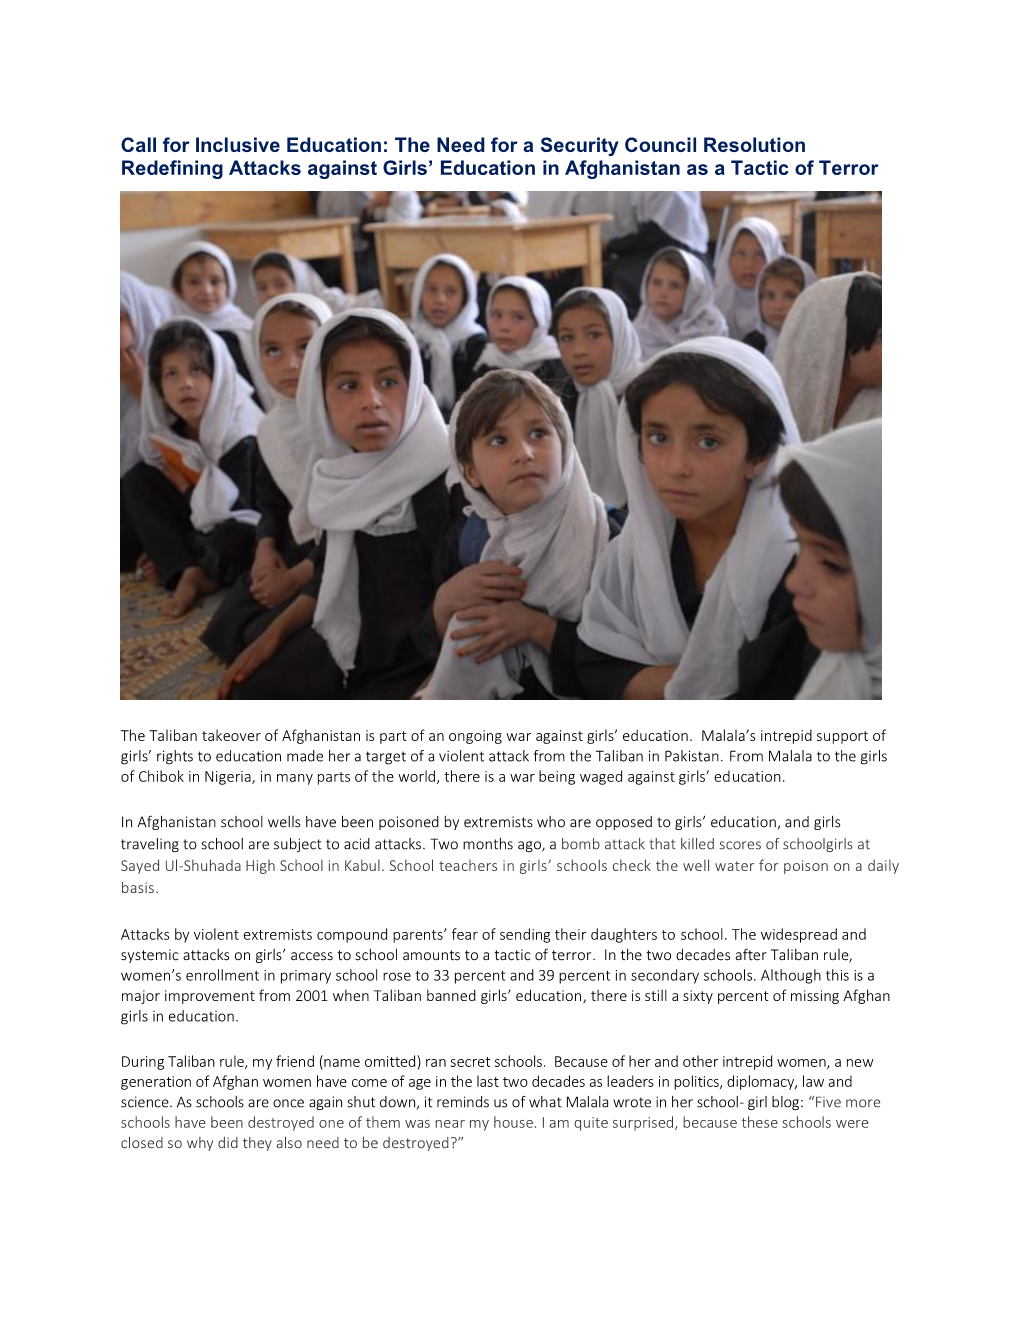 Call for Inclusive Education: the Need for a Security Council Resolution Redefining Attacks Against Girls’ Education in Afghanistan As a Tactic of Terror